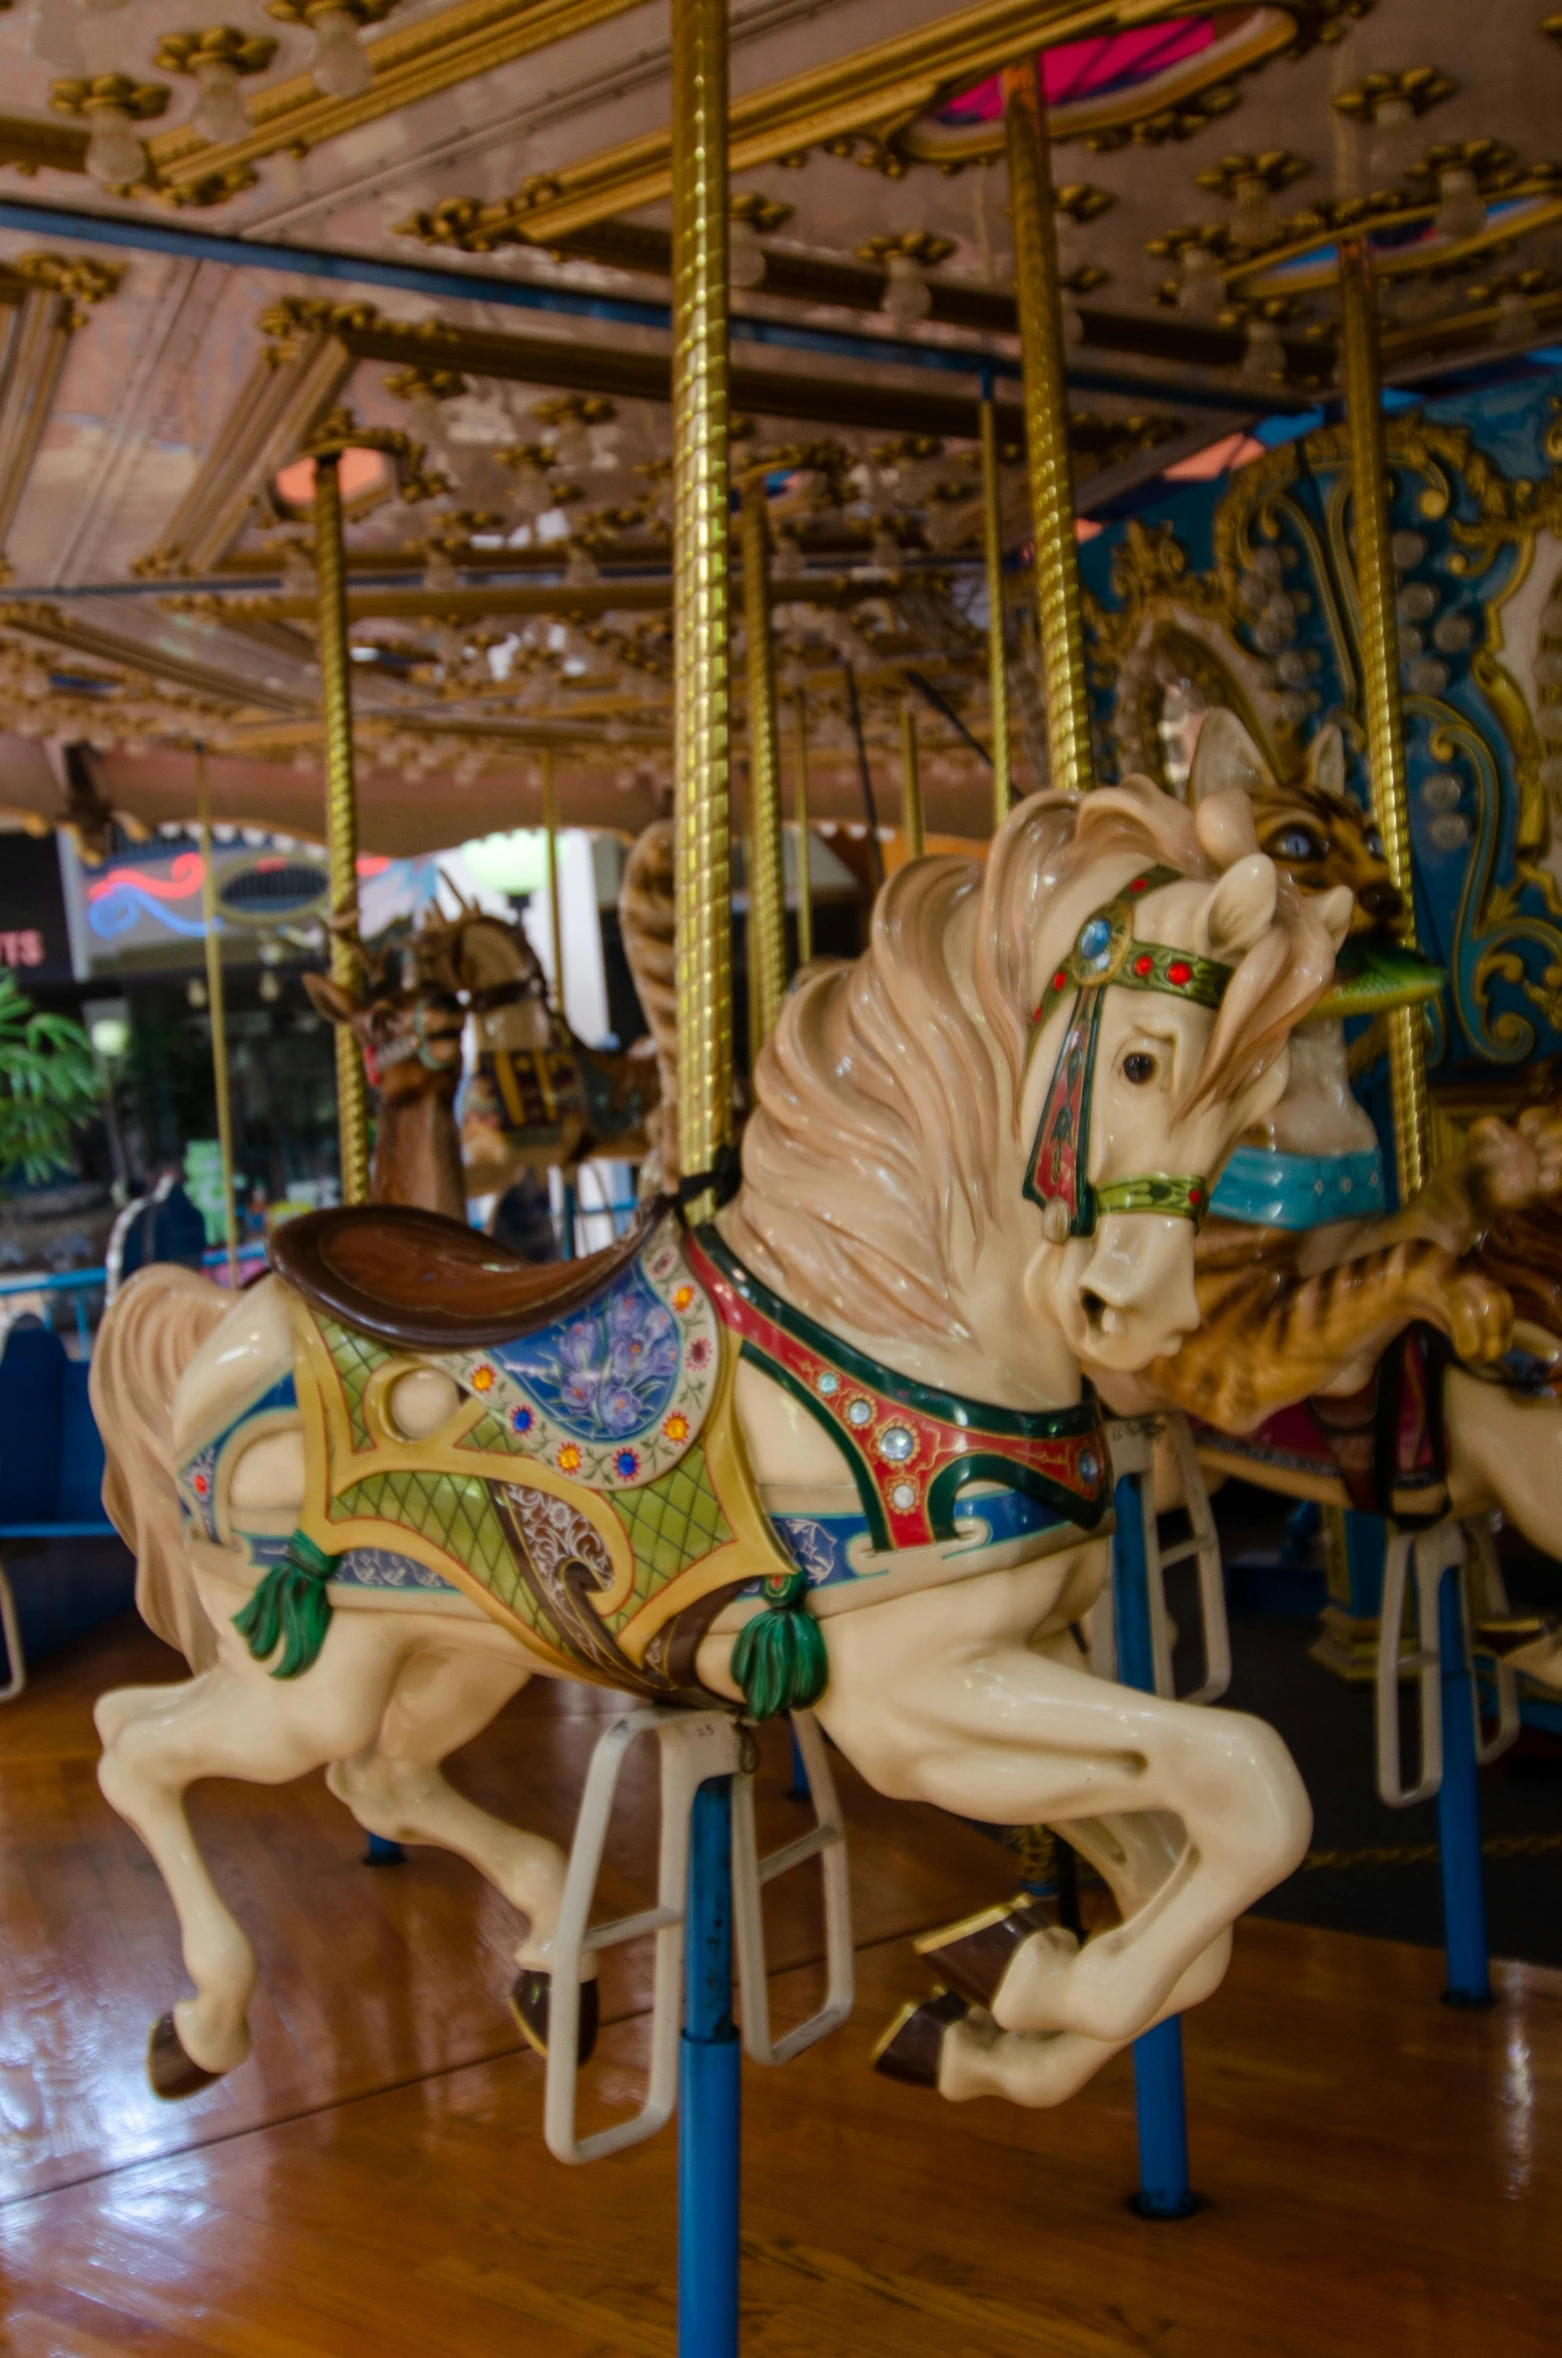 the carousel has two horses riding on the wooden floor